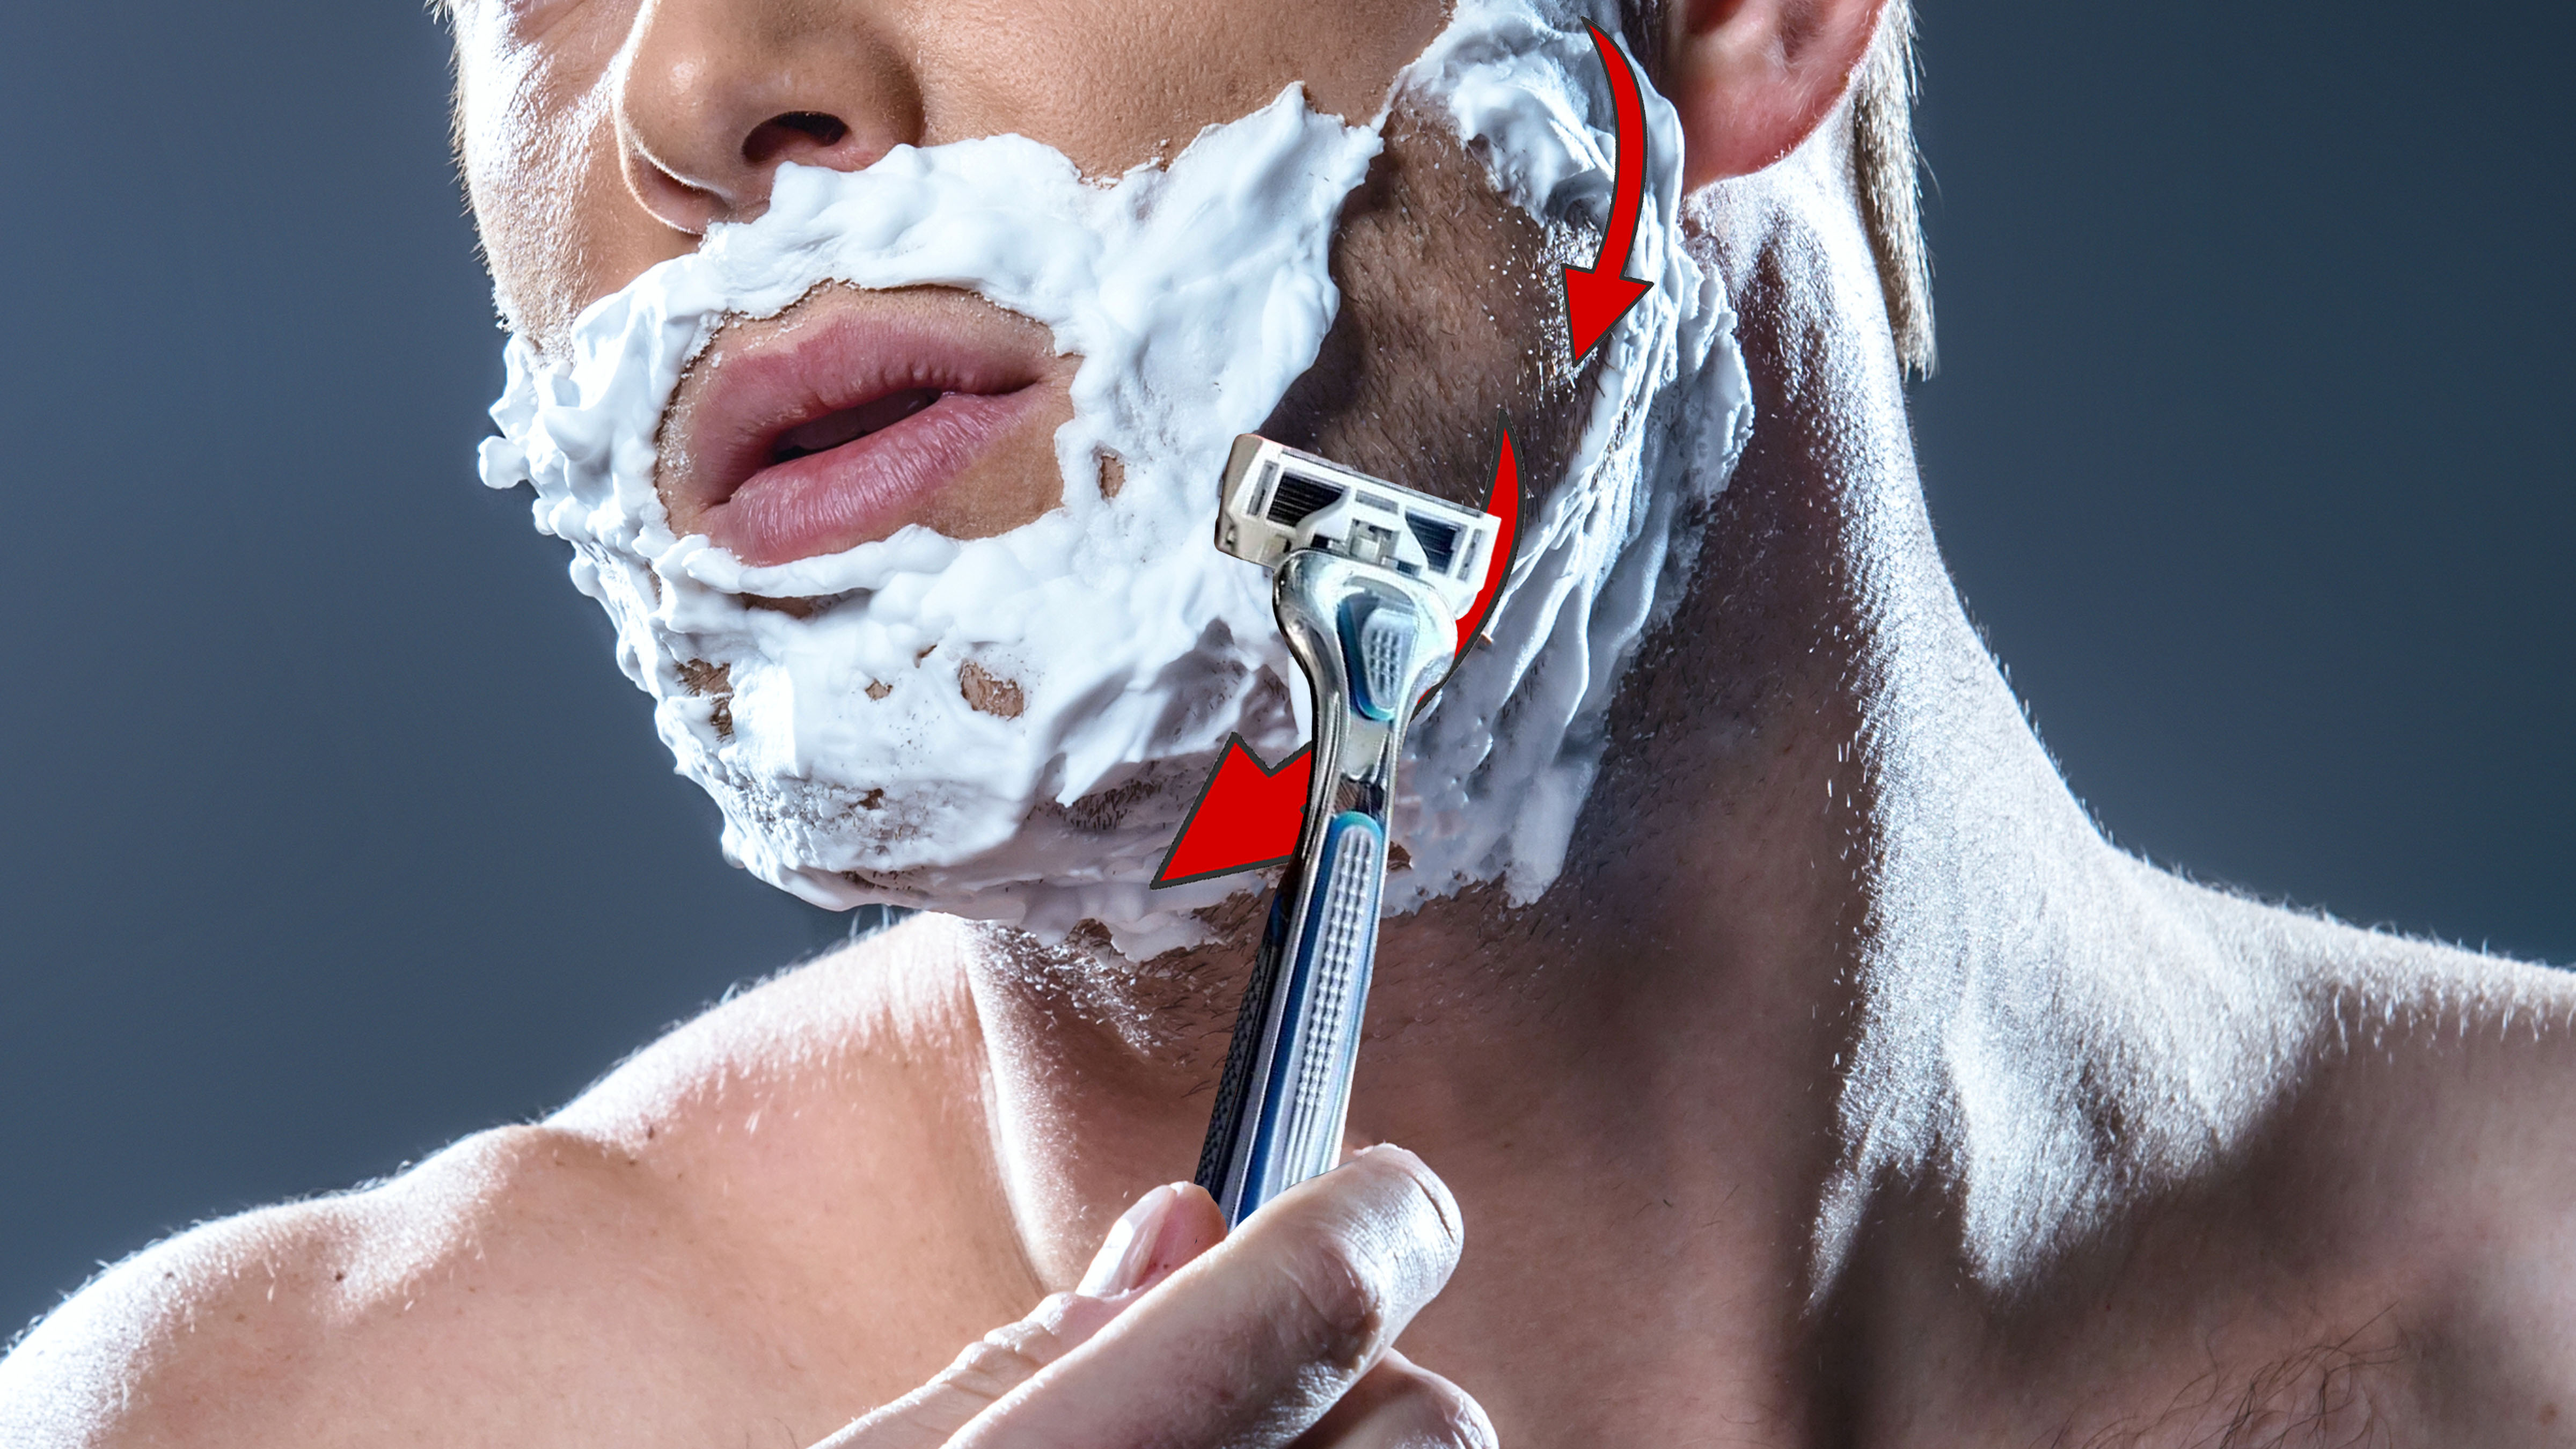 Shave With The Grain 15 Tips For The Perfect Shave Dollar Shave